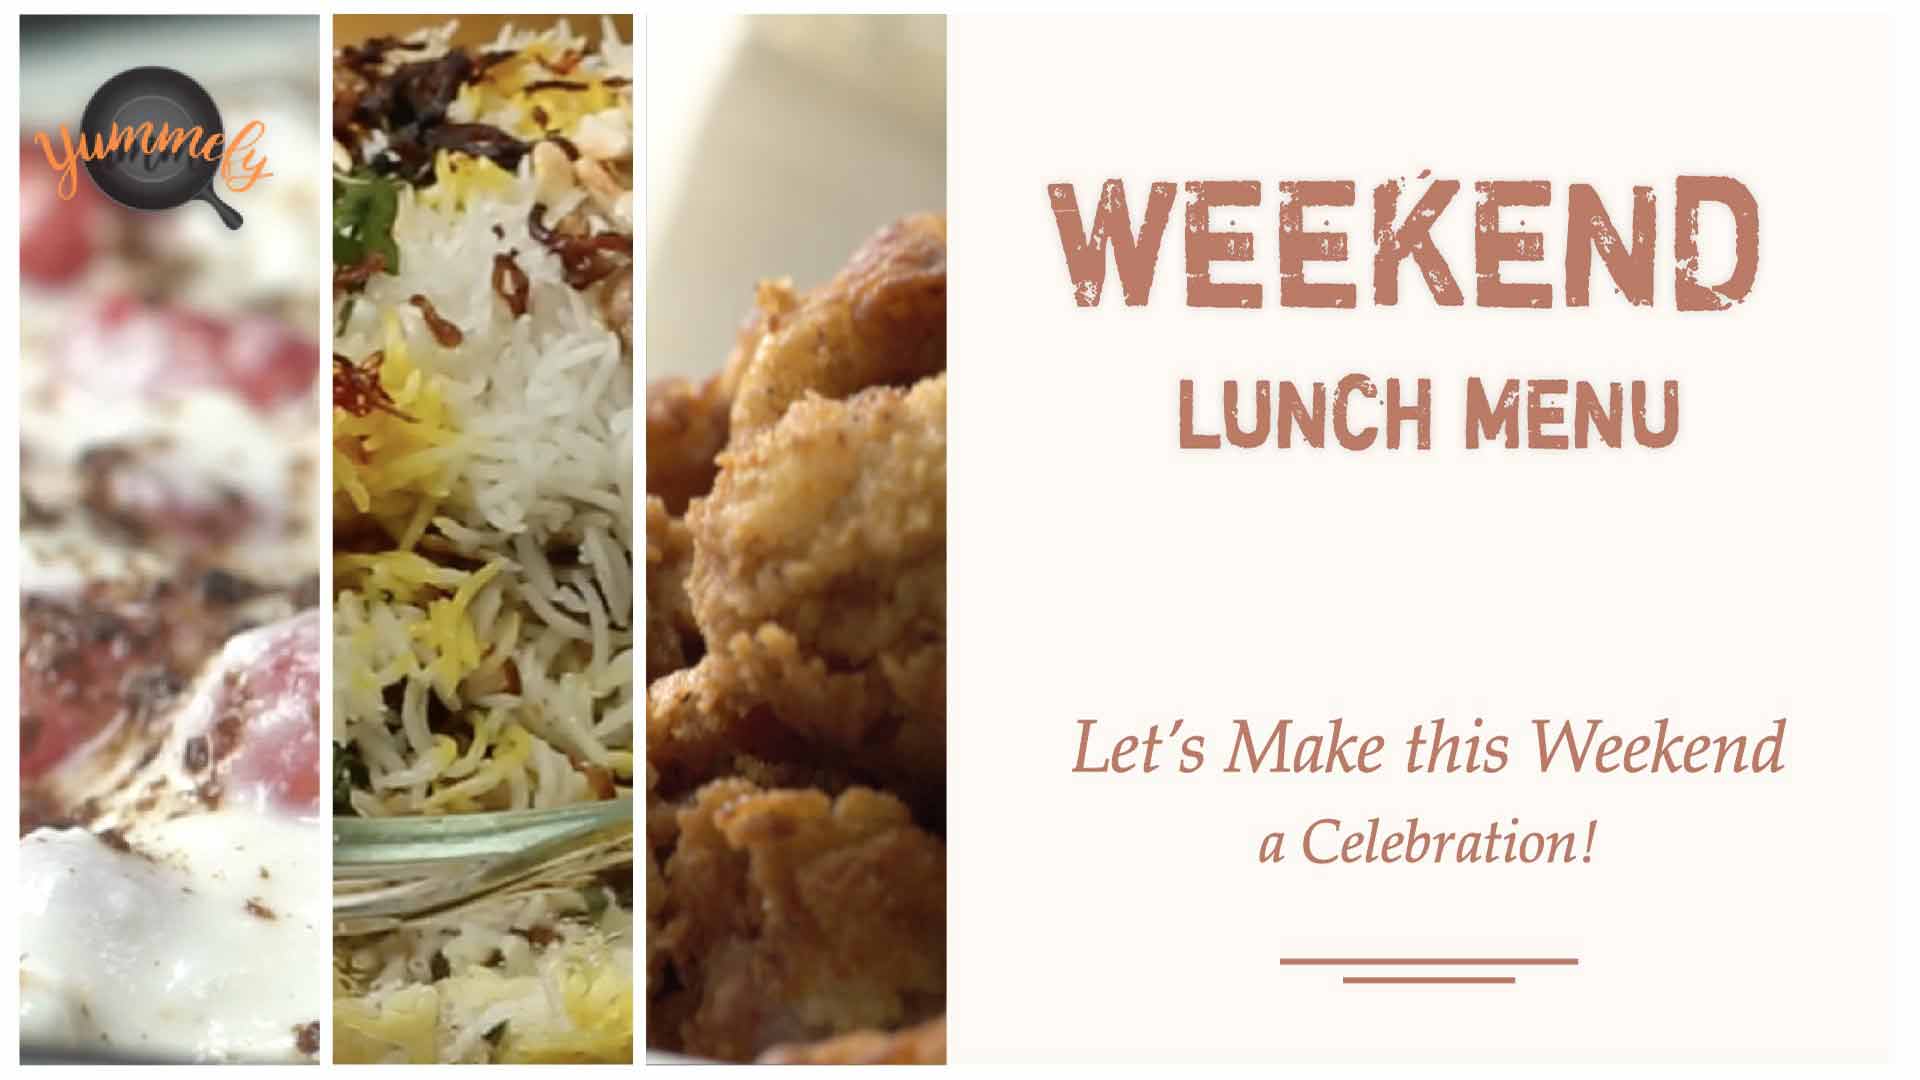 Celebrate This Weekend with Yummefy | Lunch Menu